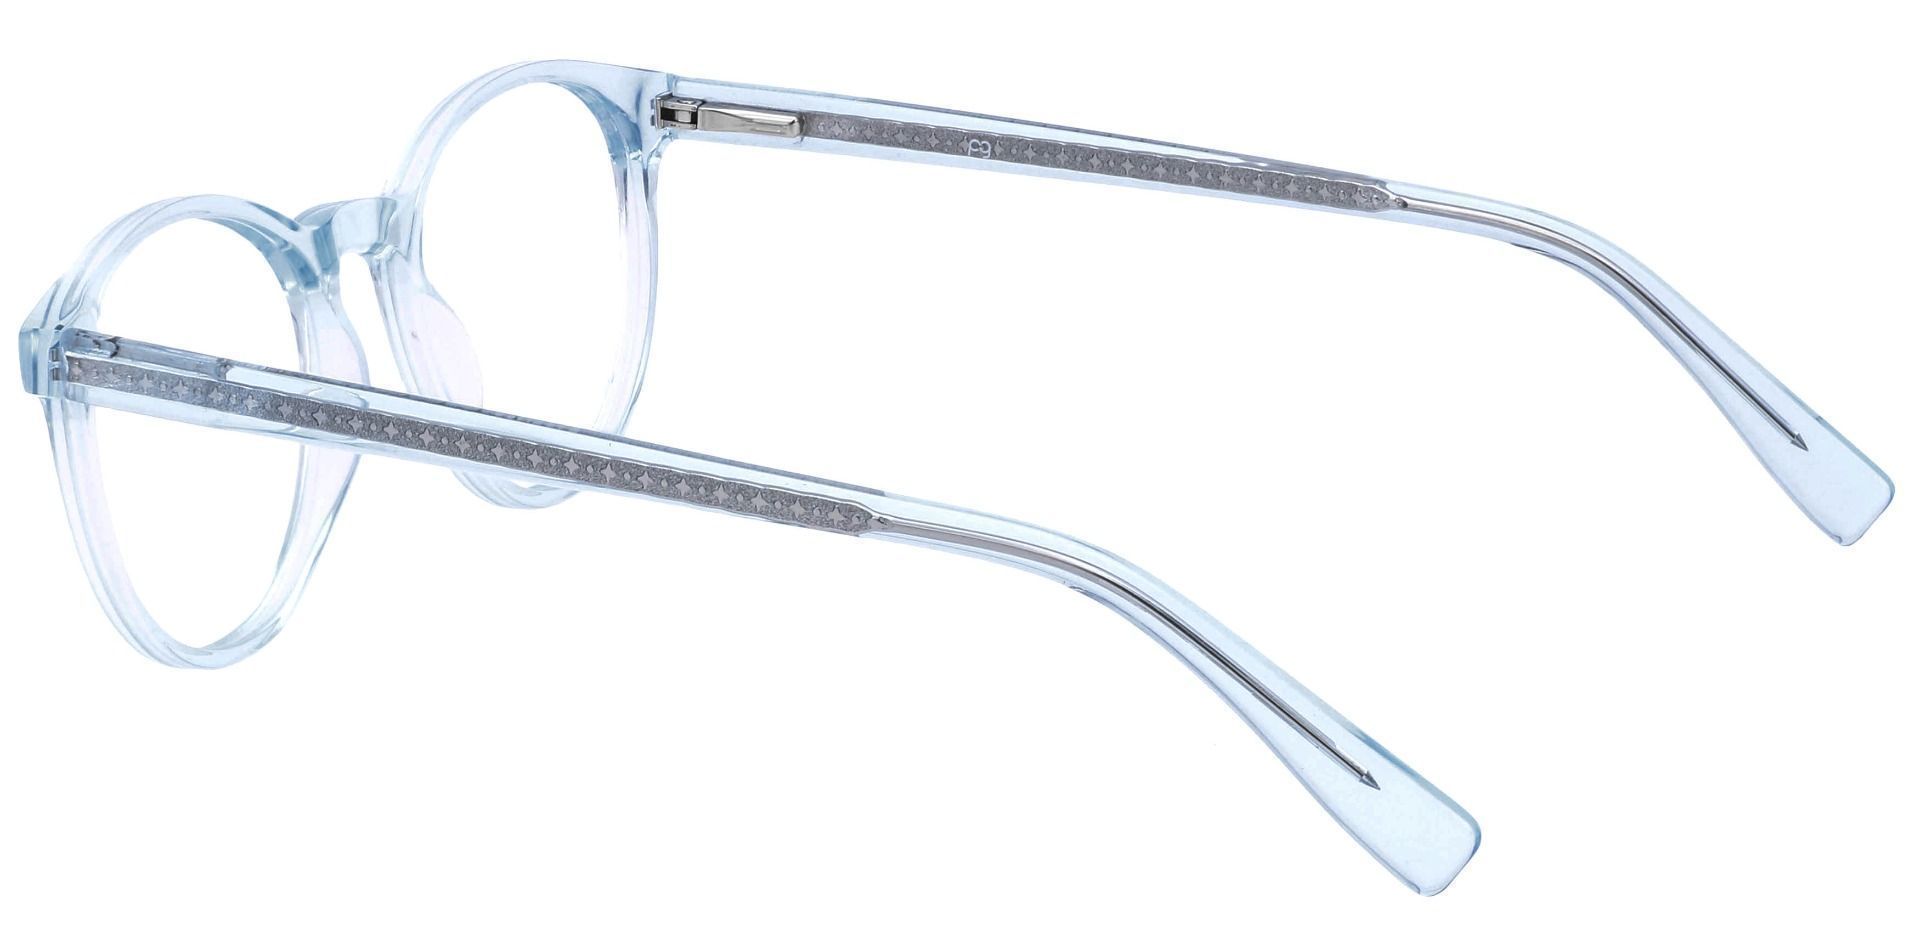 Stellar Oval Reading Glasses - The Frame Is Clear With Light Blue